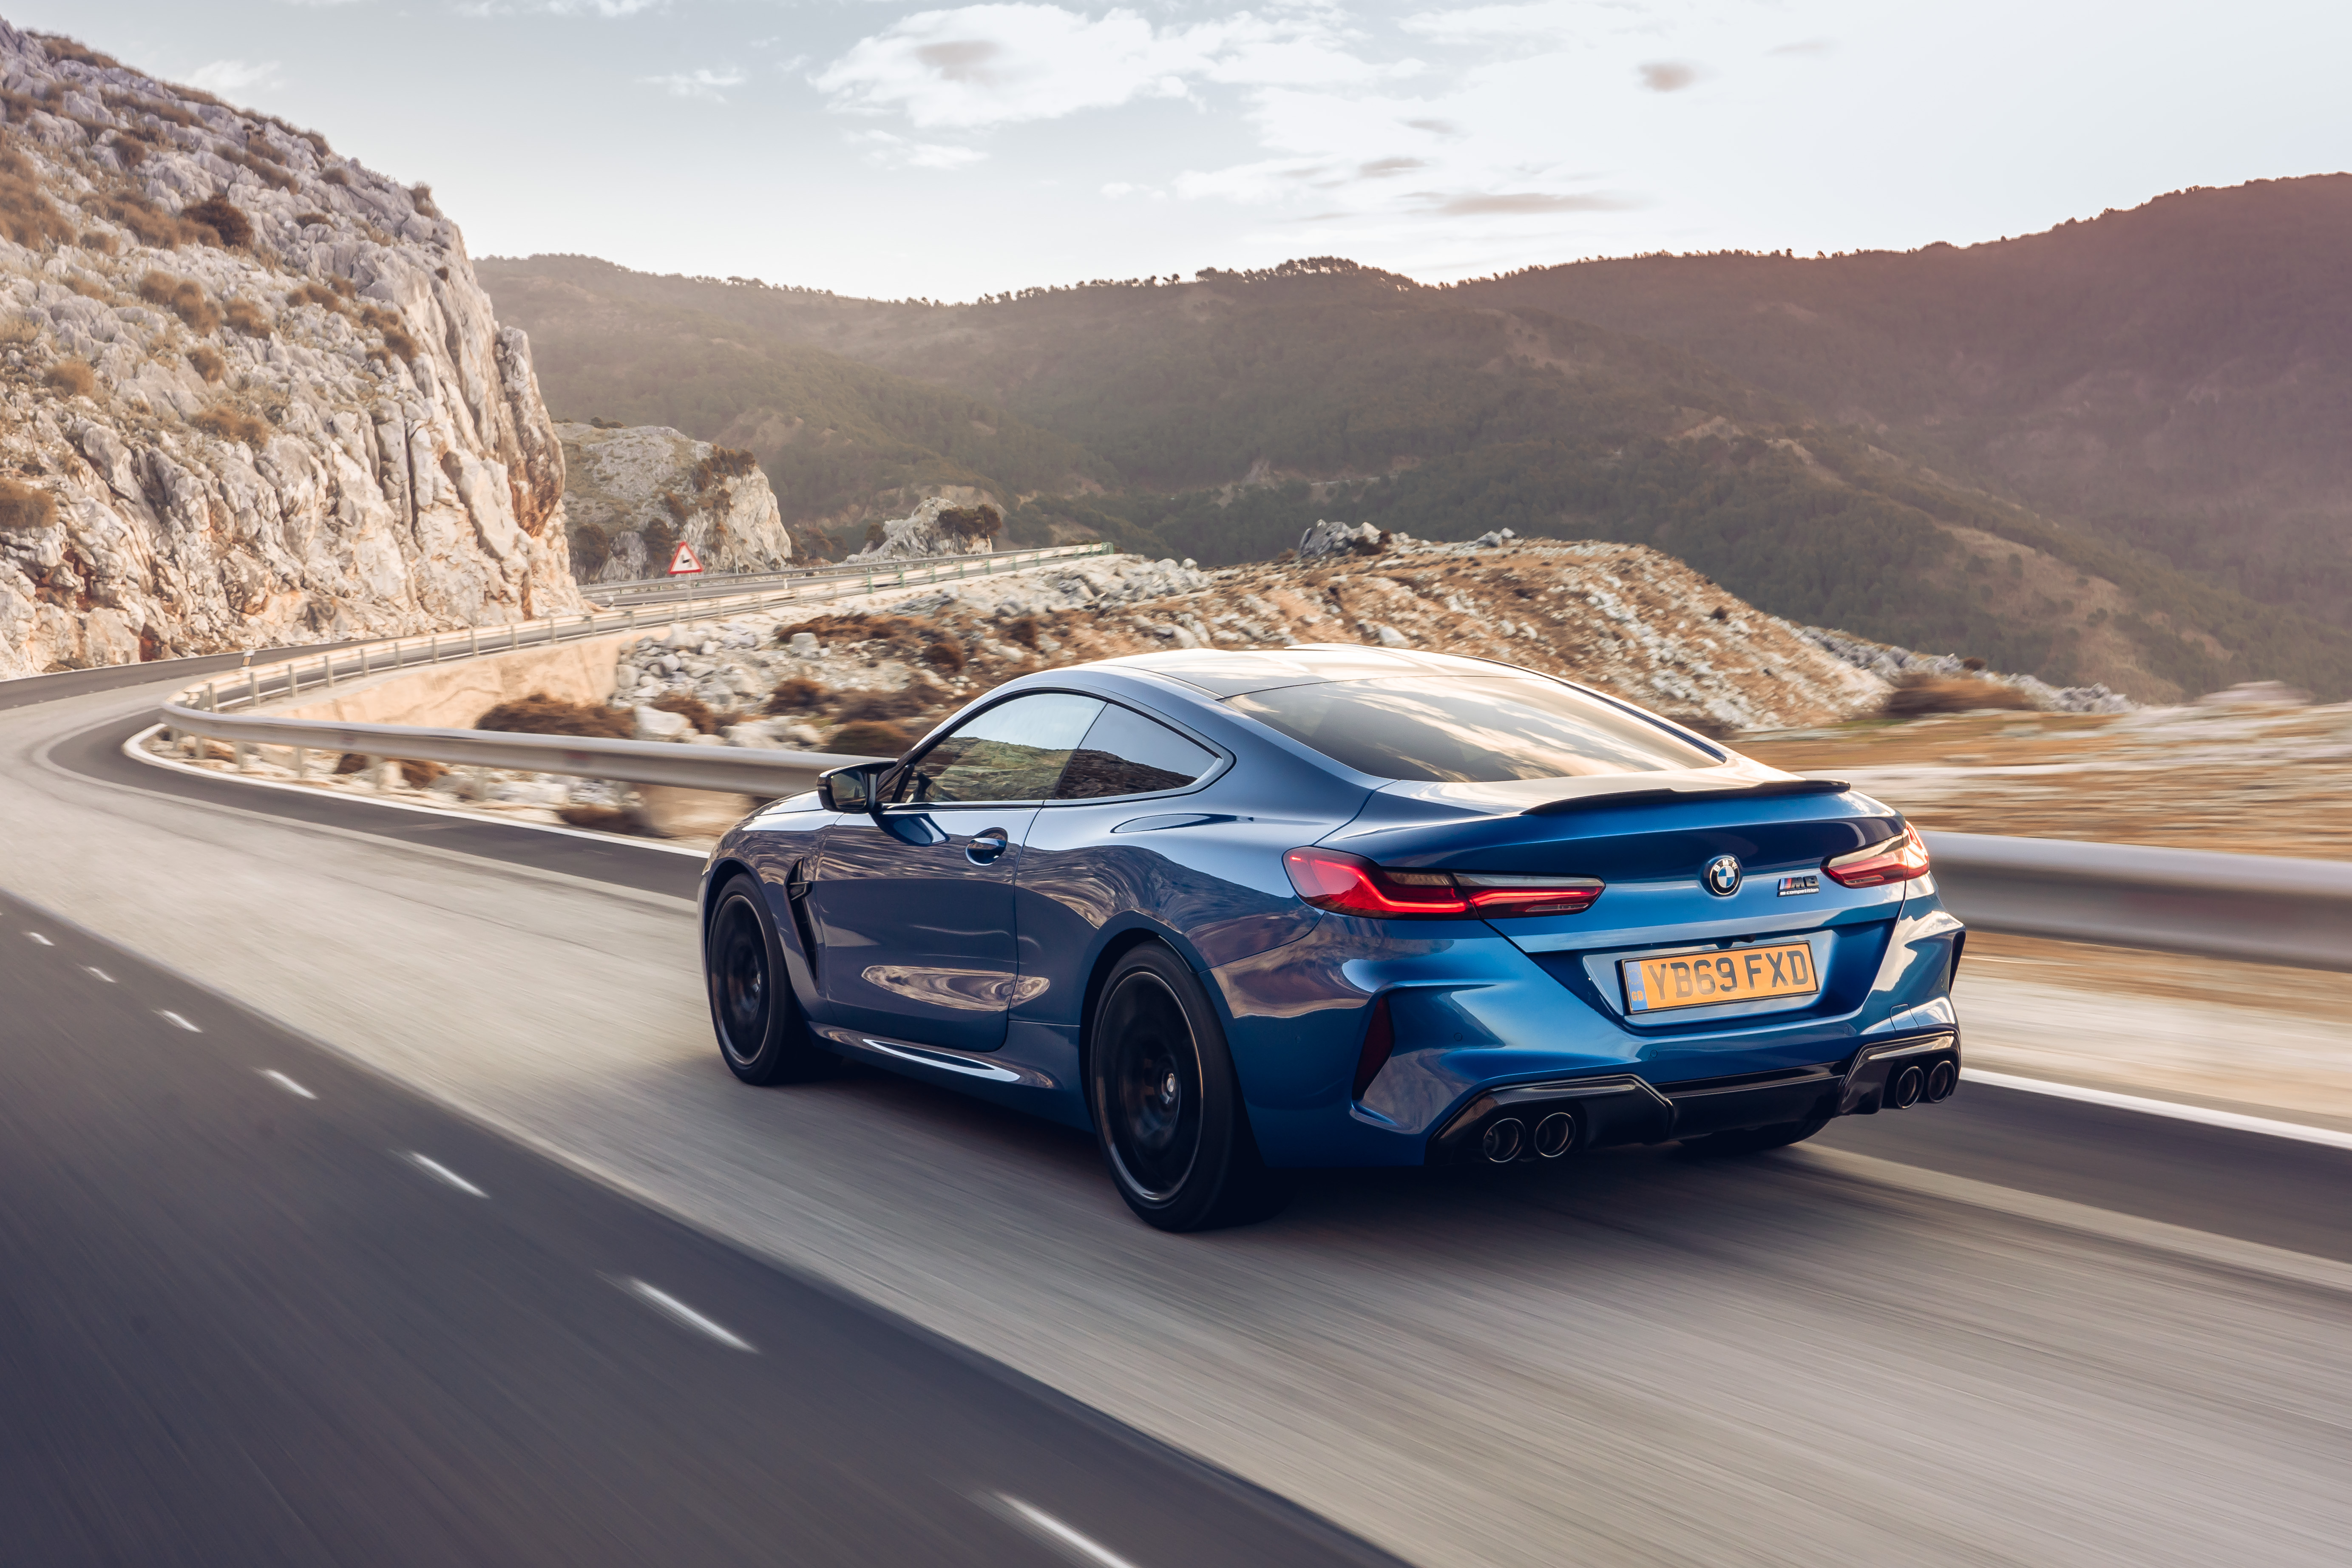 M 8 competition. BMW m8 Competition. BMW m8 Competition Coupe f92. БМВ м8 Competition 2021. BMW m8 2020.